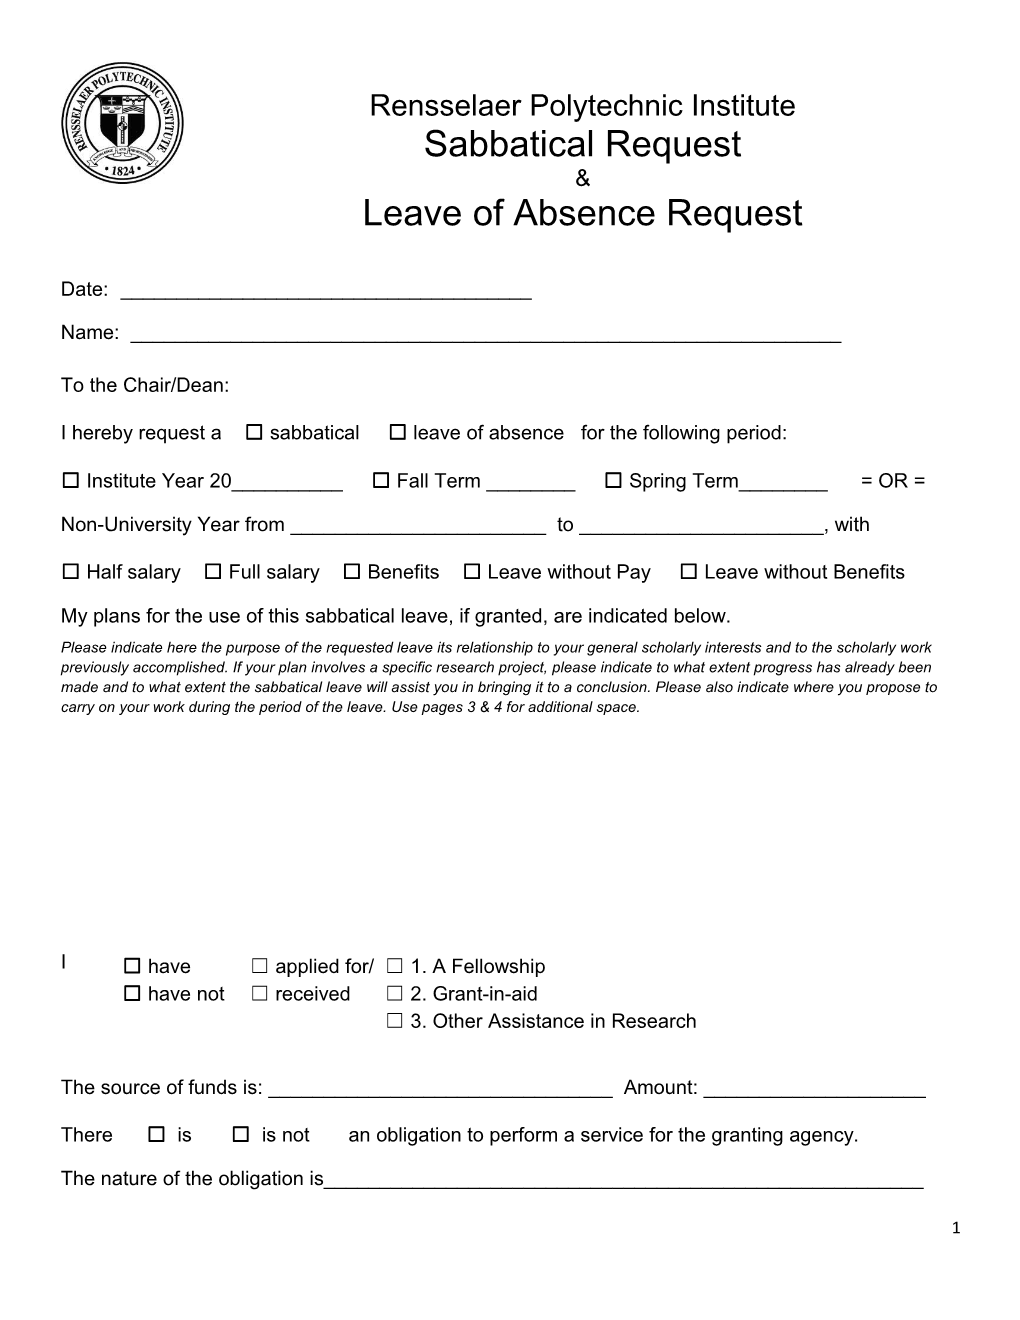 I Hereby Request a Sabbatical Leave of Absence for the Following Period